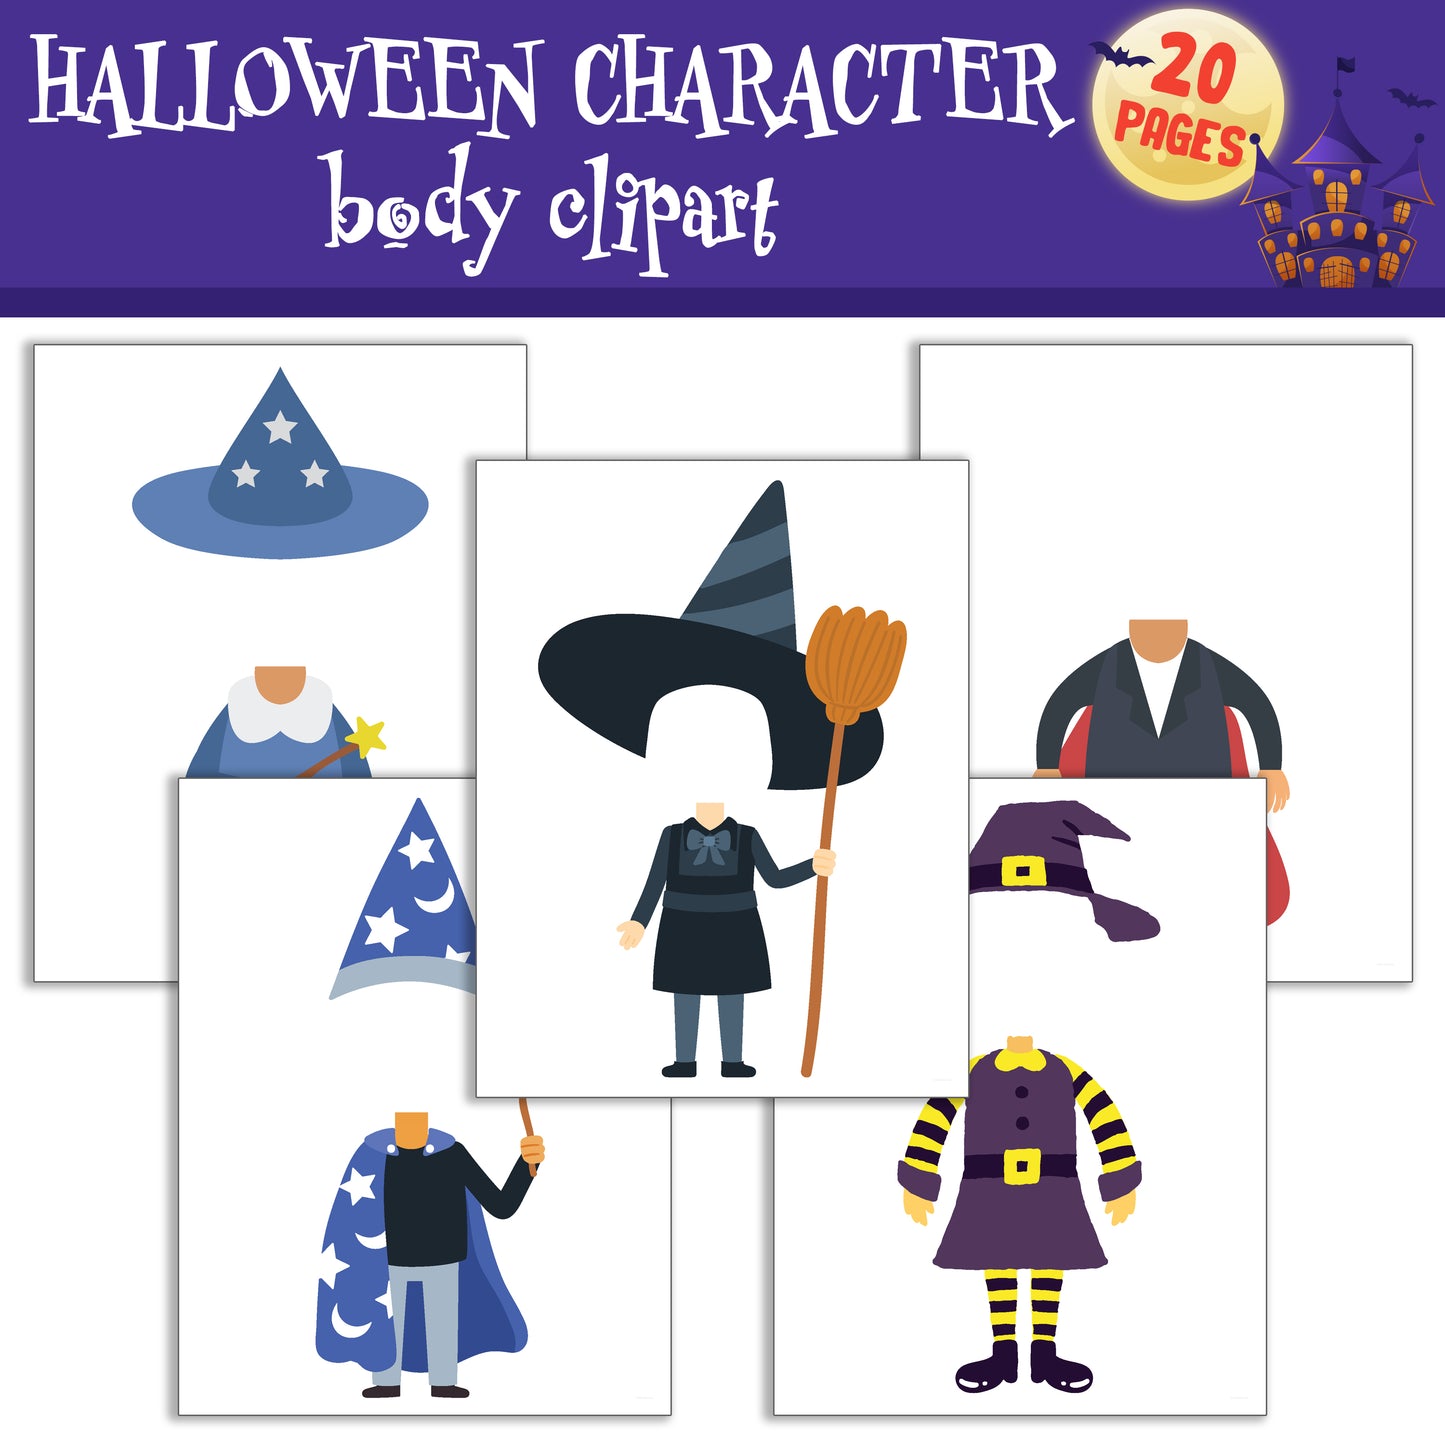 Spooky Halloween Character Body Clipart Set with Customizable Faces - 20 Pages, PDF, Instant Download for Kids (PreK to 6th Grade)